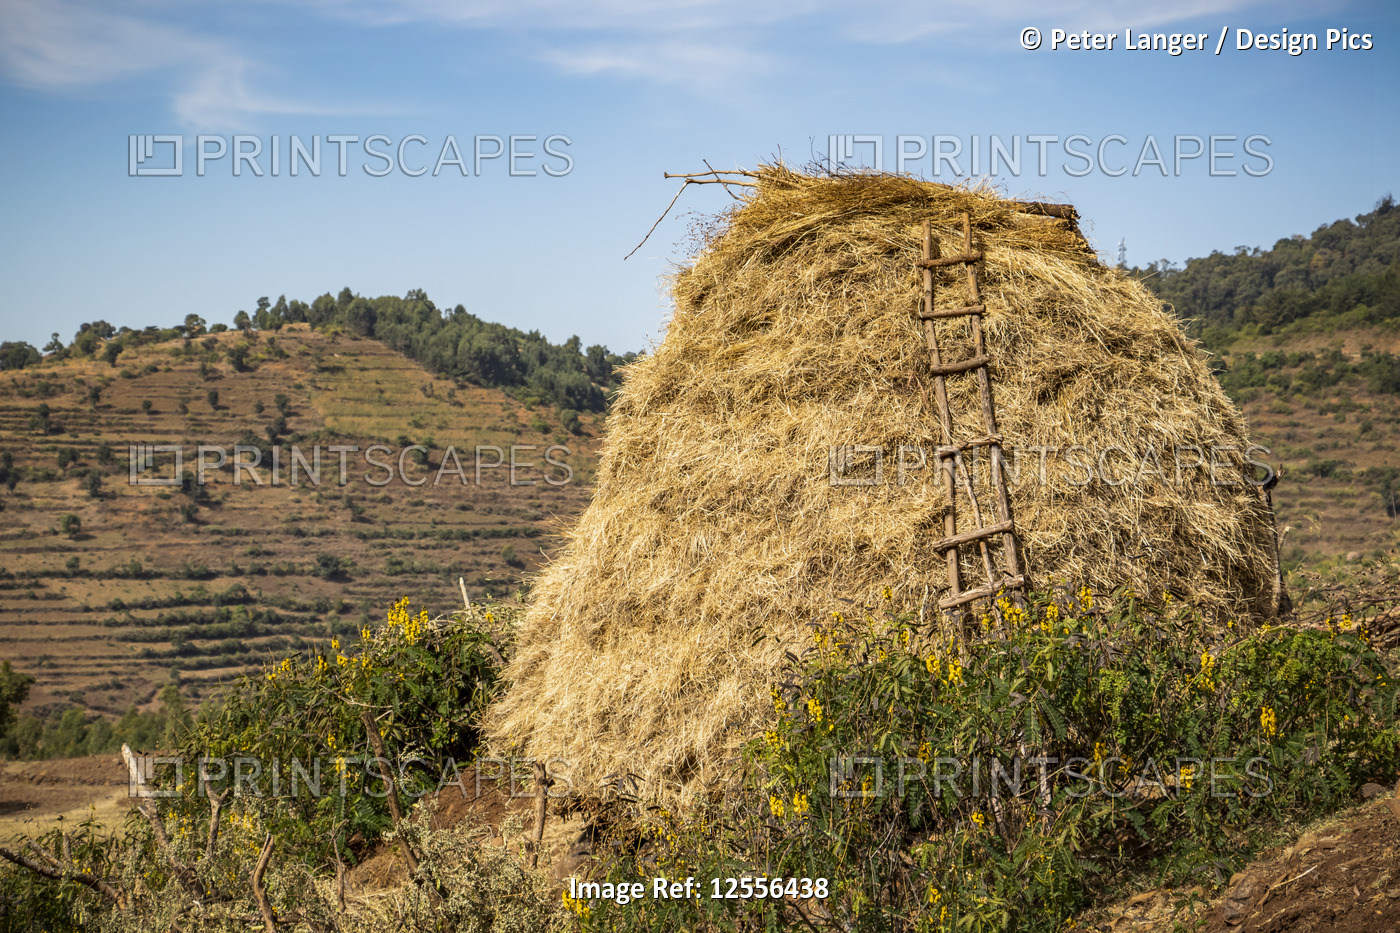 Rocky outcrop covered with straw and a ladder leaning against it; Addis Zemen, ...